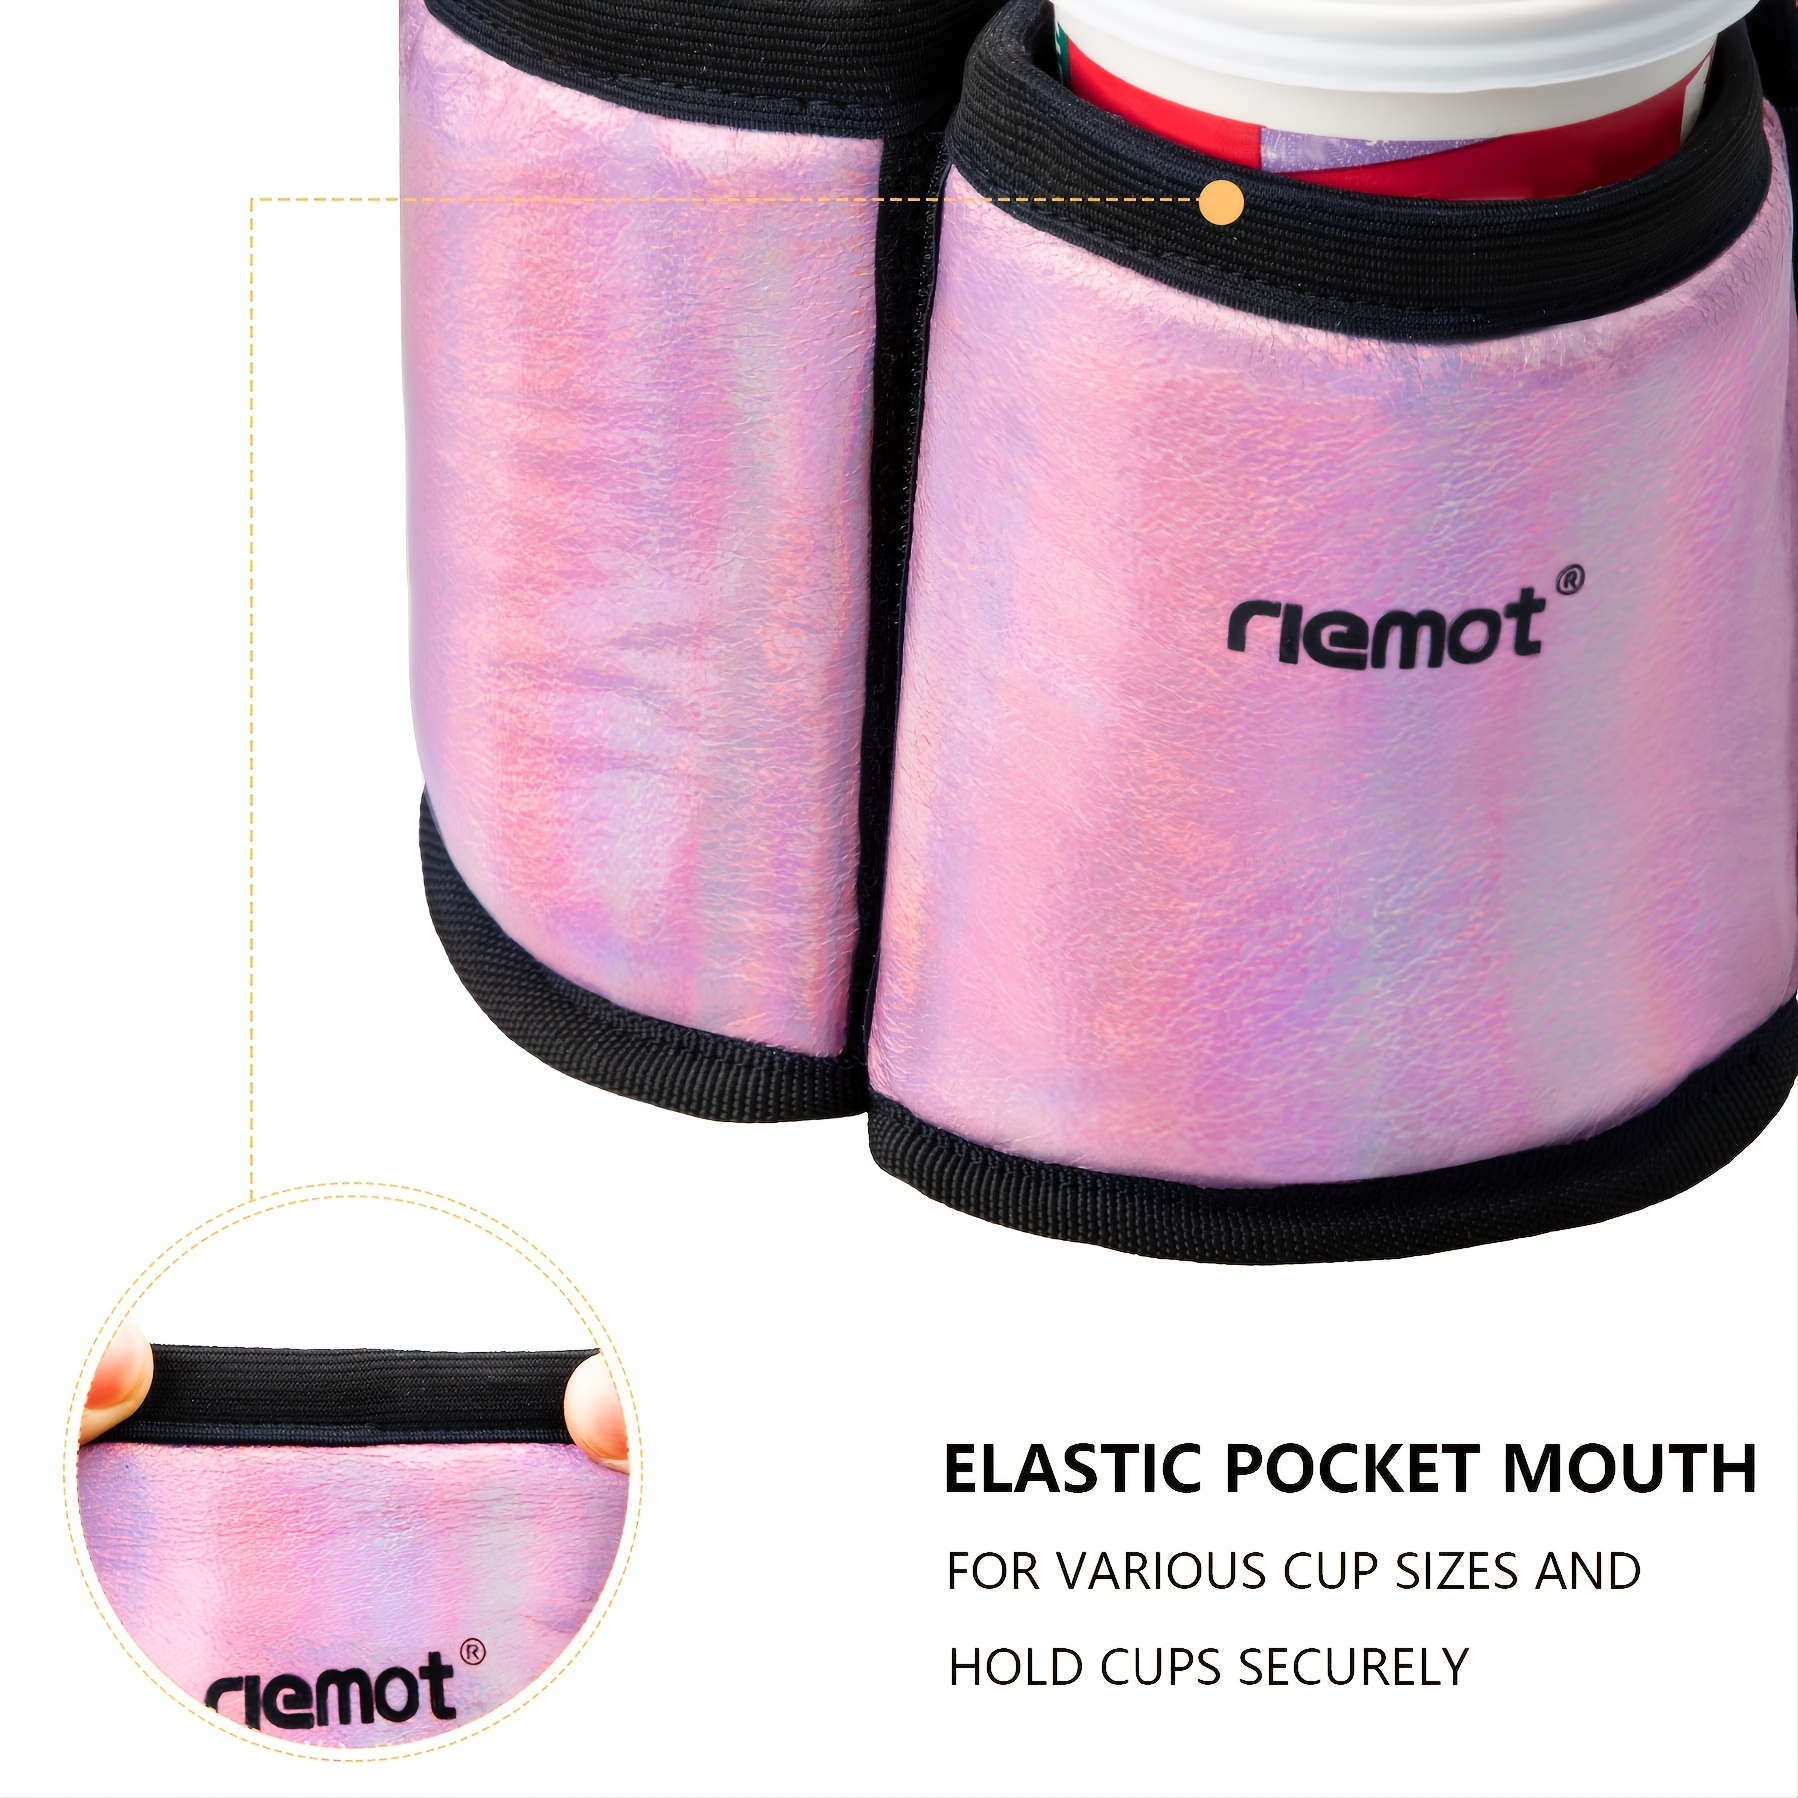 Riemot Luggage Travel Cup Caddy Holder As Gift Drink Caddy Hold